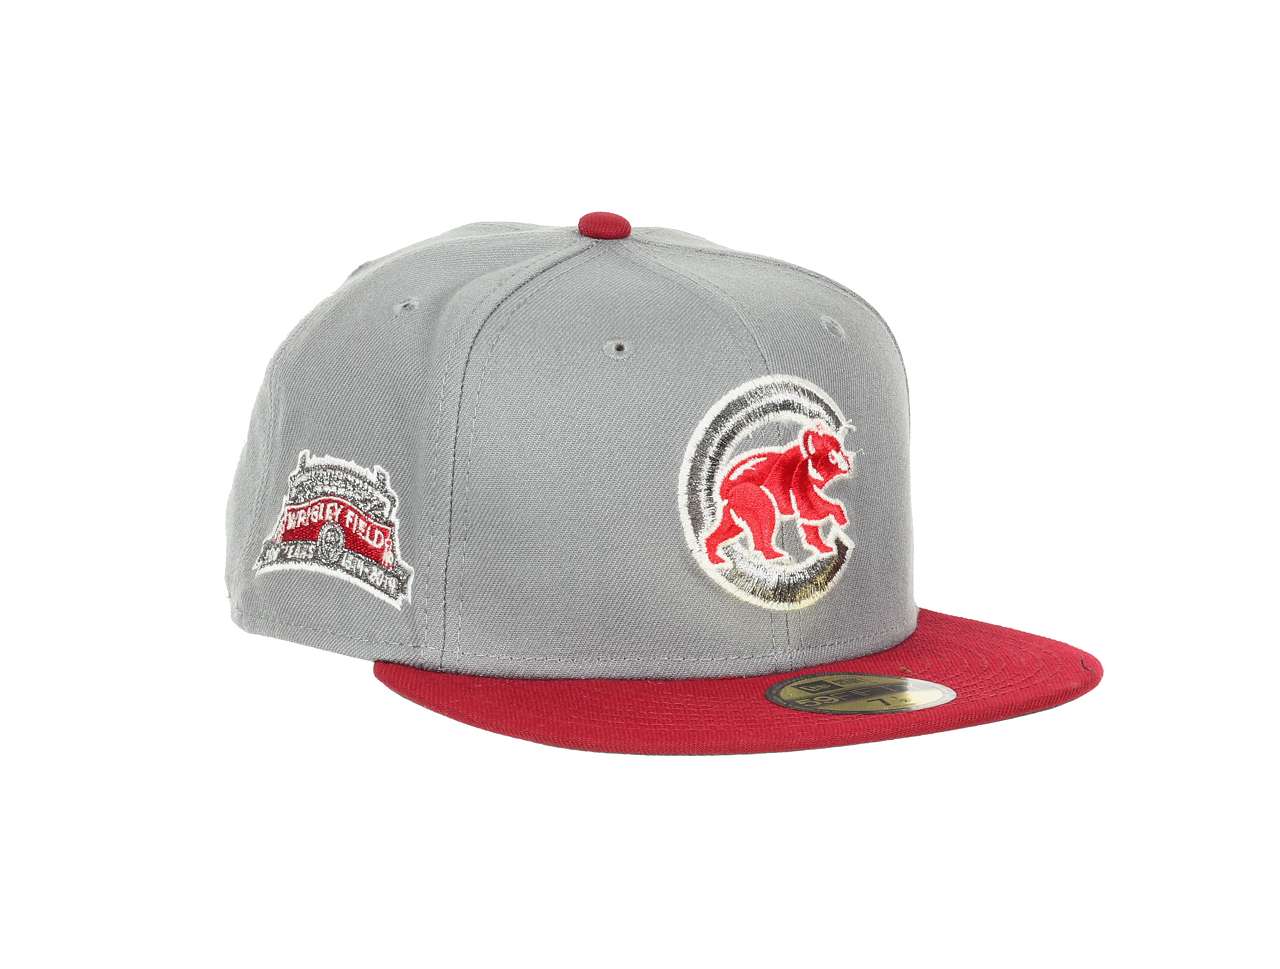 Chicago Cubs MLB Cooperstown 100 Years Wrigley Field Grey Cardinal 59Fifty Basecap New Era